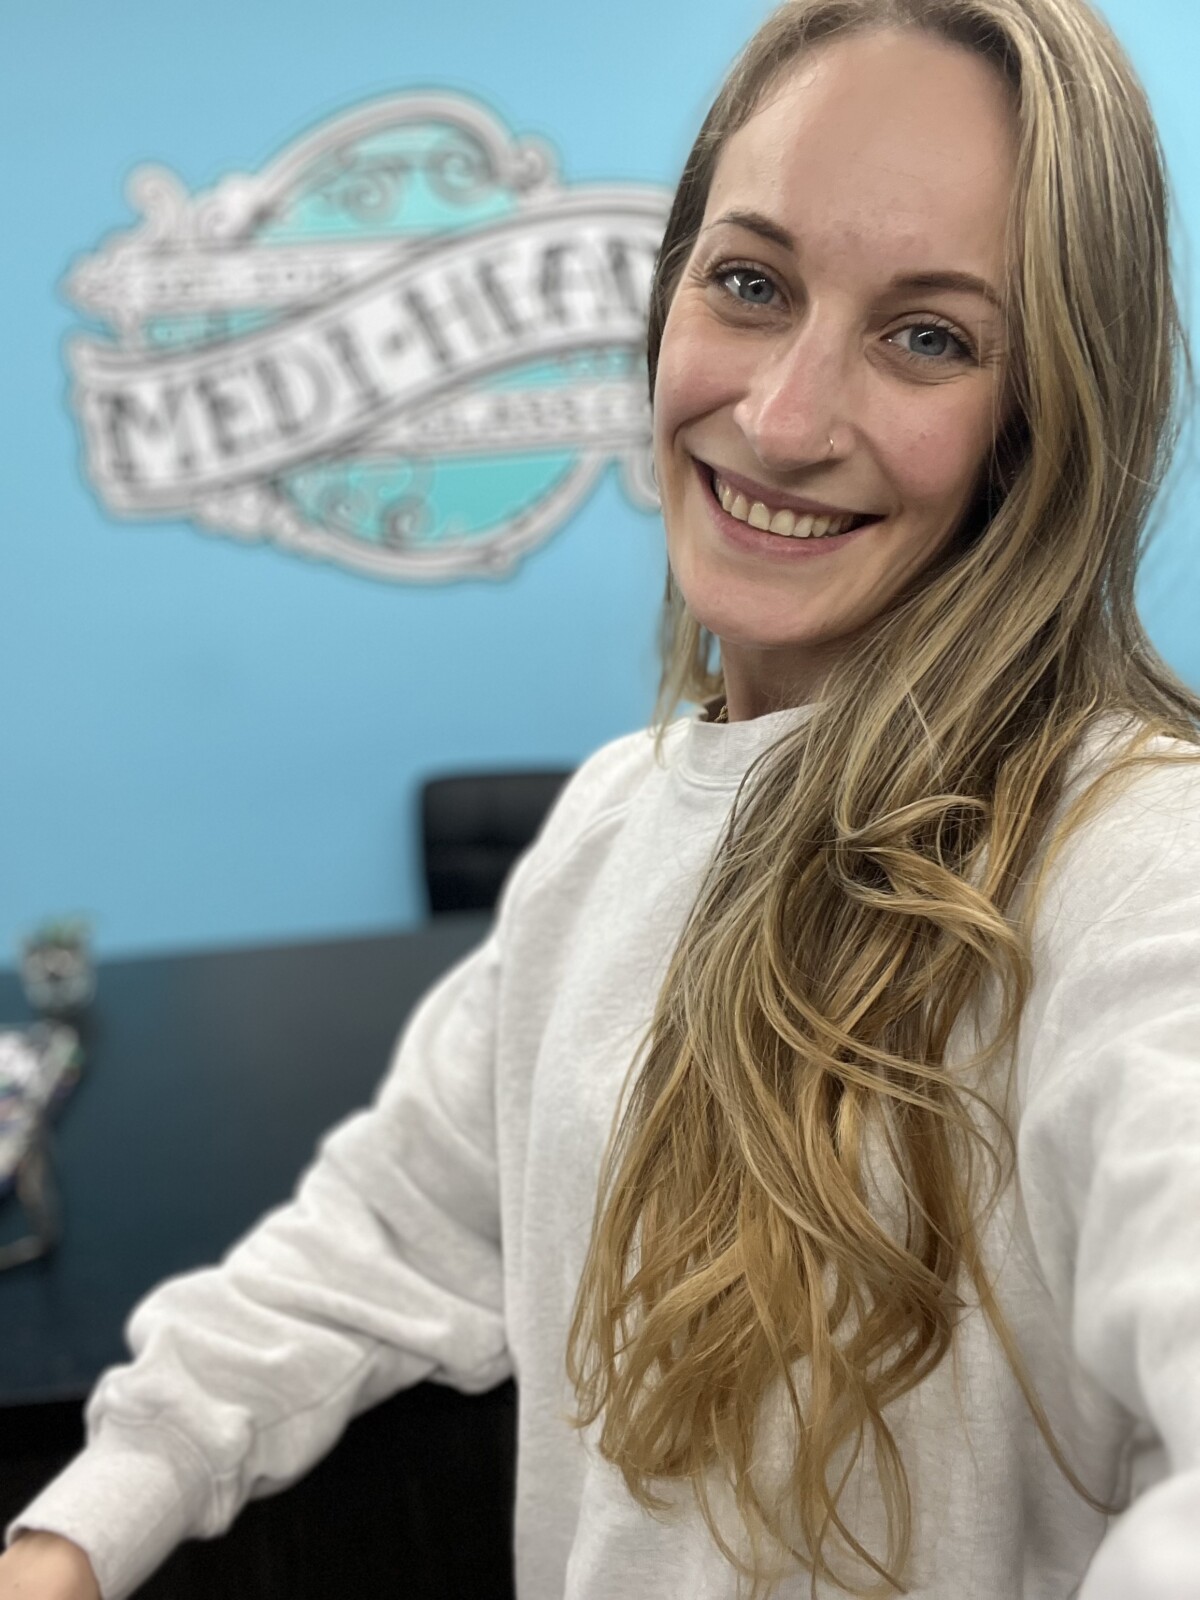 Kailee Hardie, Owner of Medi Heady Glass Co., wearing a white sweatshirt, takes a selfie in an office with a blue wall featuring the logo of Medi Heady Glass Co., which specializes in creating heady glass for cannabis concentrates.